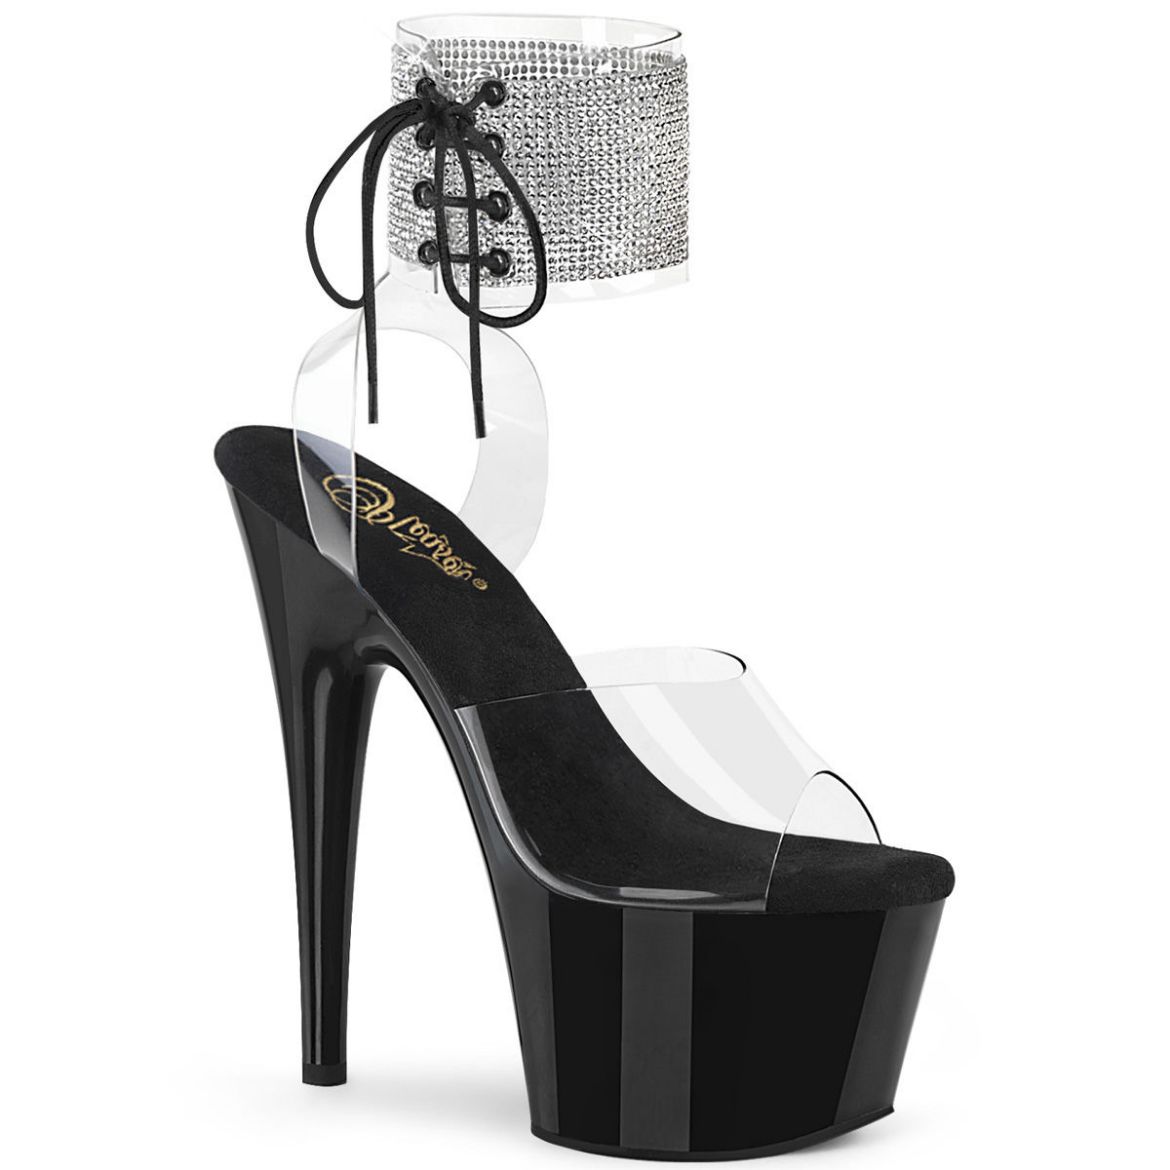 Product image of Pleaser ADORE-791-2RS Clear/Black 7 inch (17.8 cm) Heel 2 3/4 inch (7 cm) Platform Ankle Cuff Sandal With Rhinestones Shoes